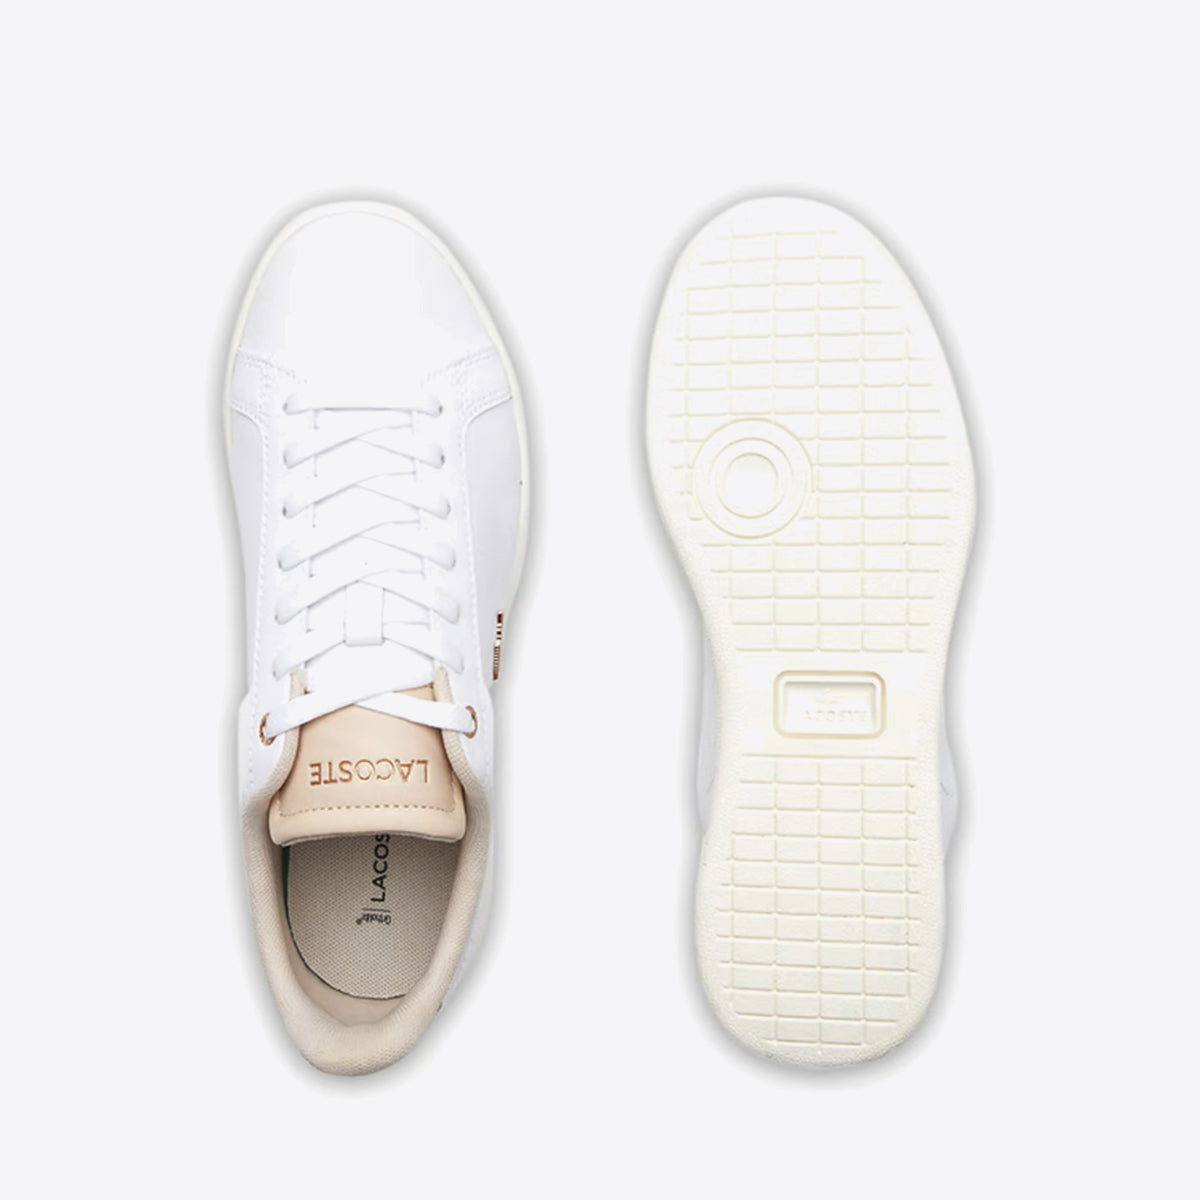 LACOSTE Carnaby Pro White/Off White - Image 4